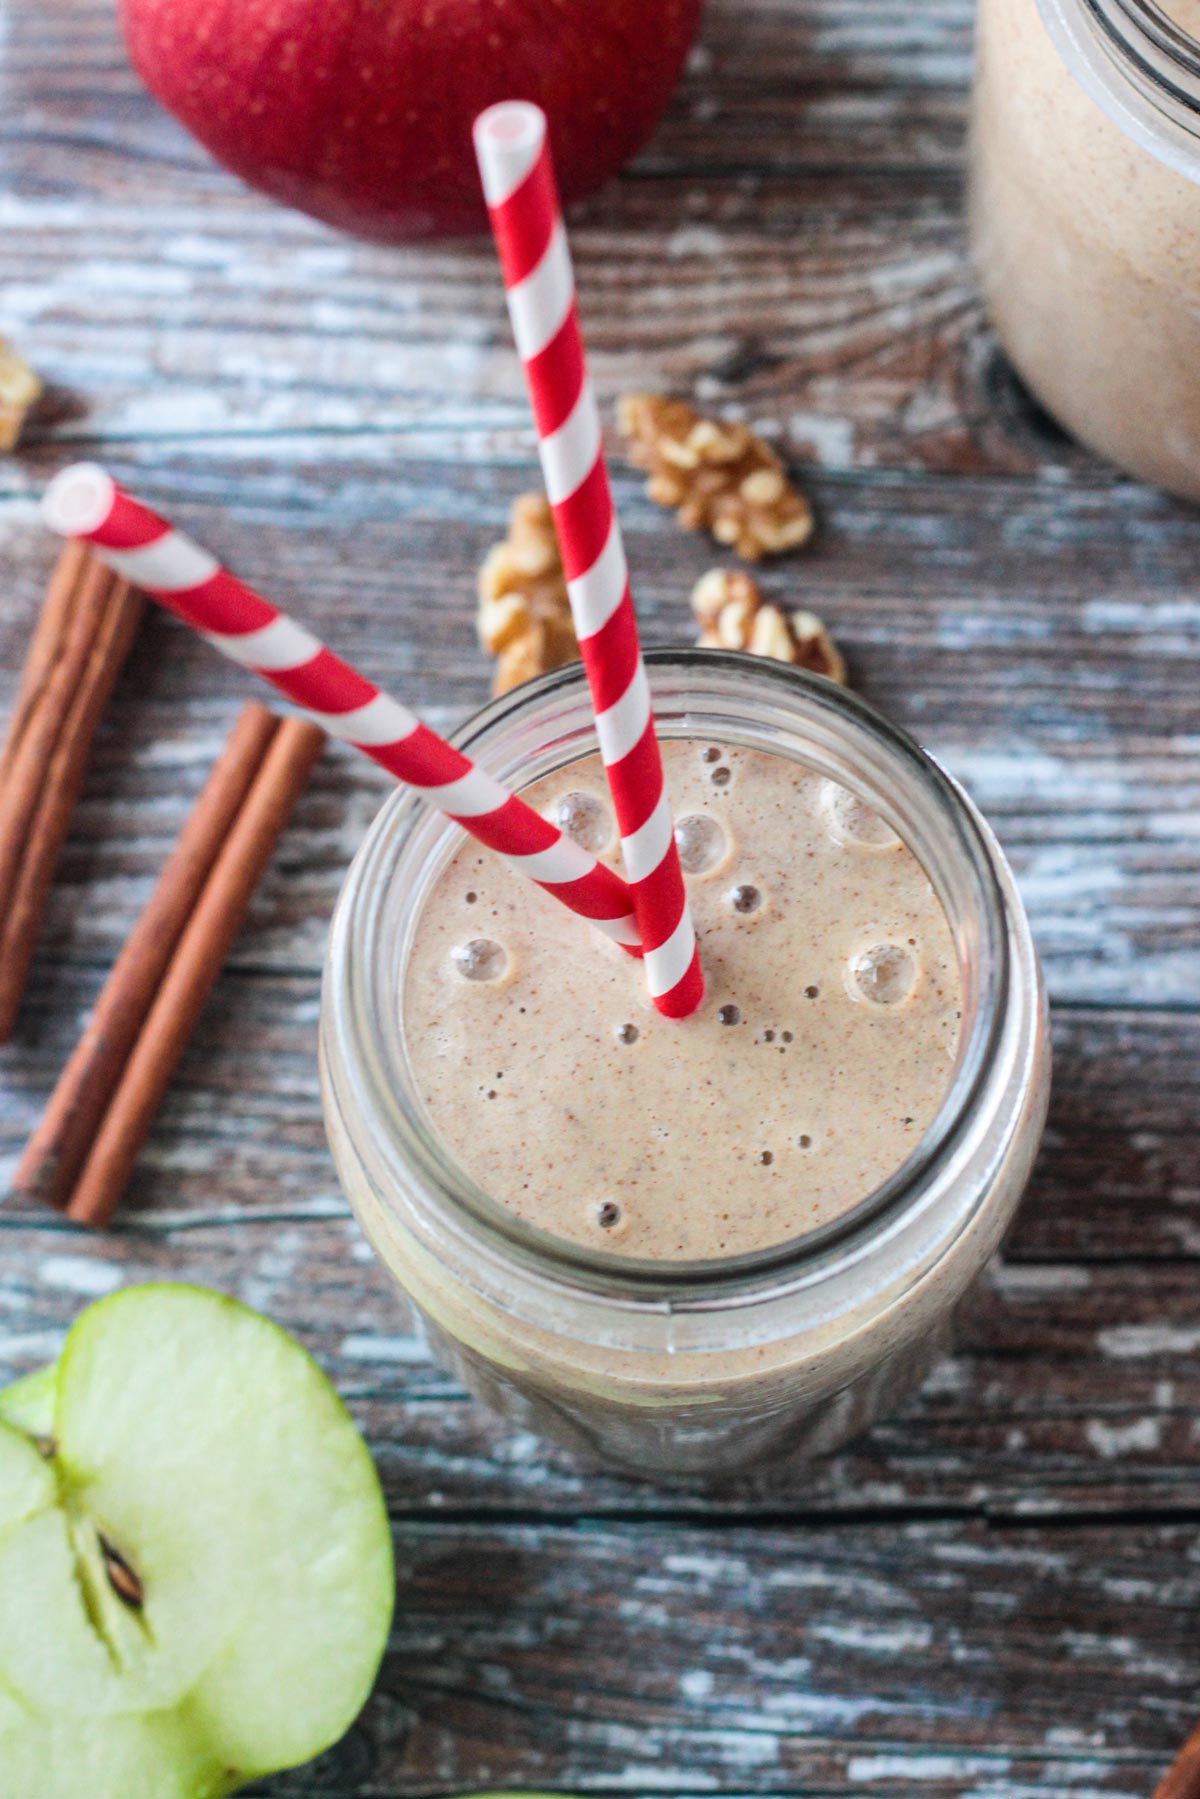 Two tall red and white striped straws in an apple pie smoothi.